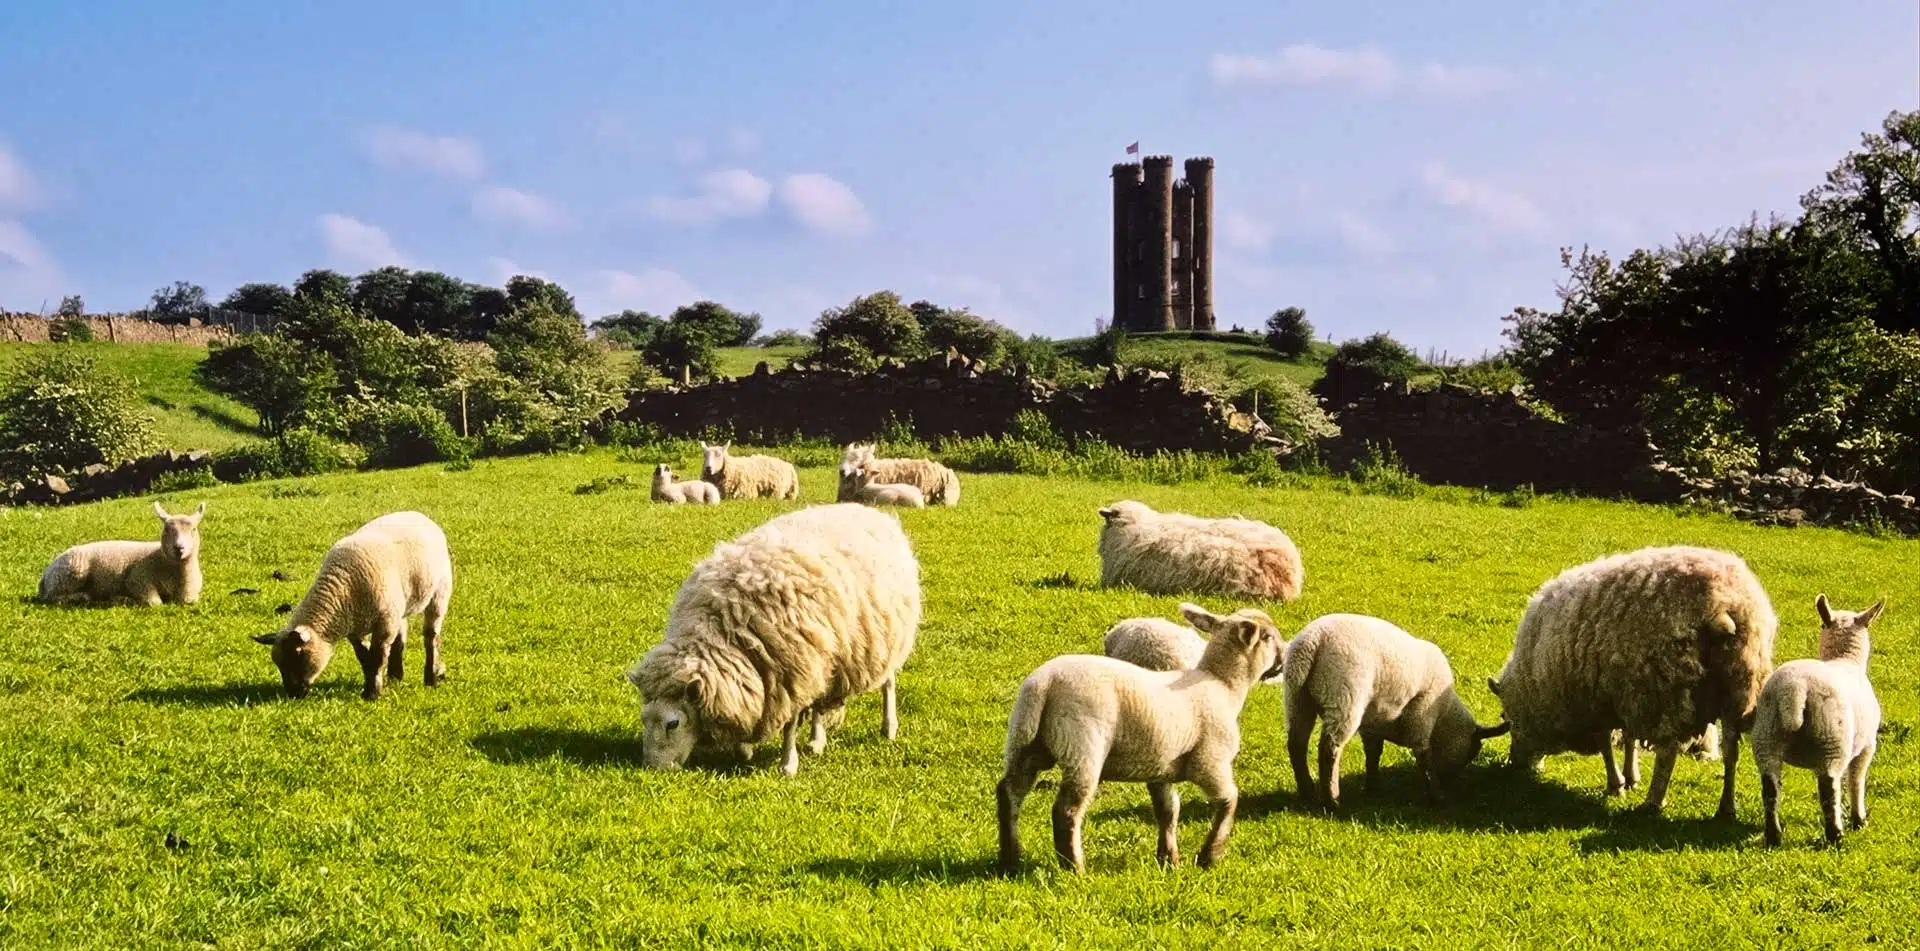 Sheep grazing in the scenic fields of the Cotswolds, England